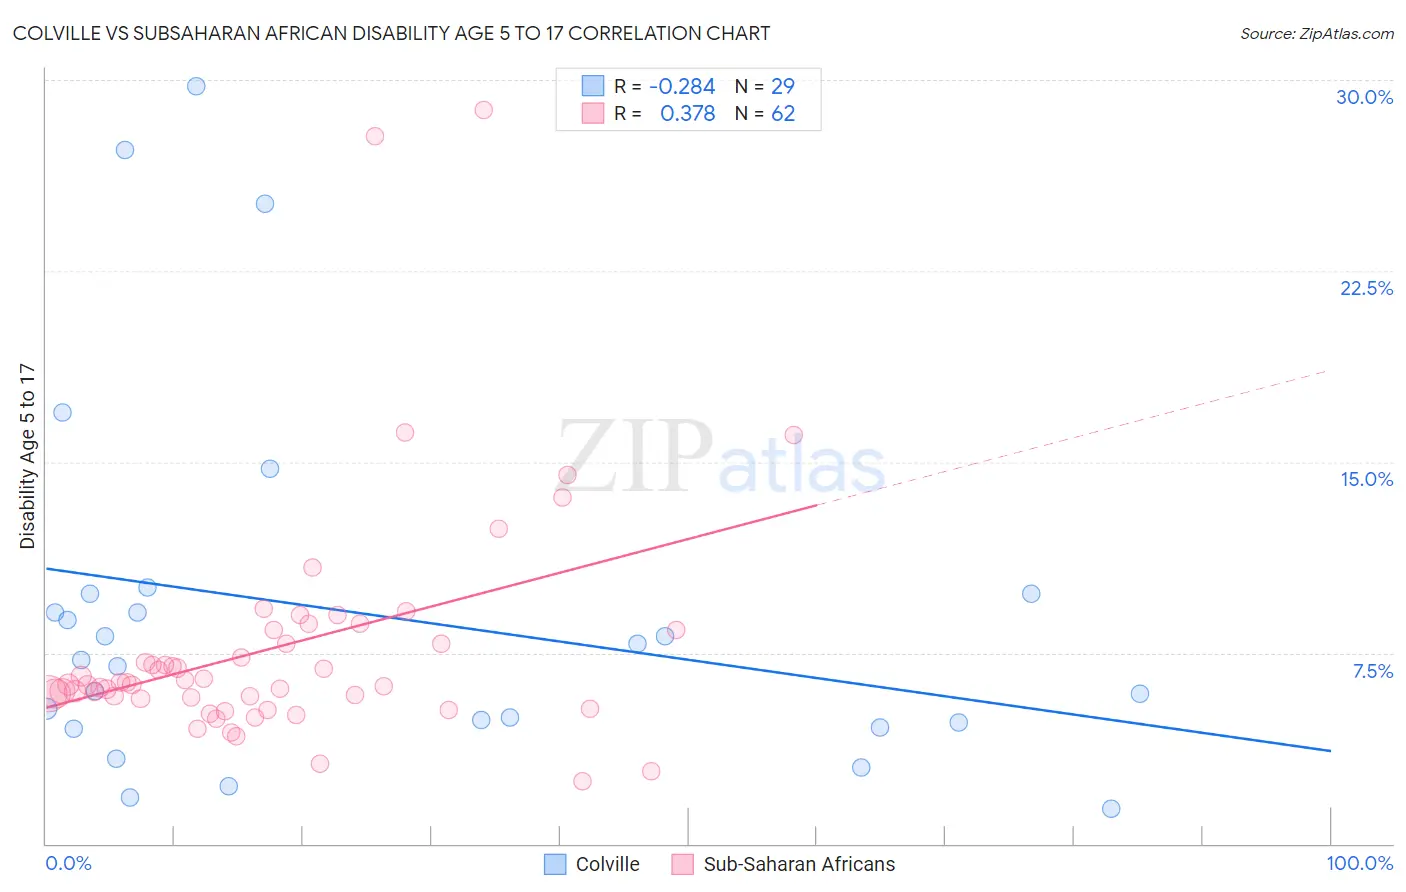 Colville vs Subsaharan African Disability Age 5 to 17